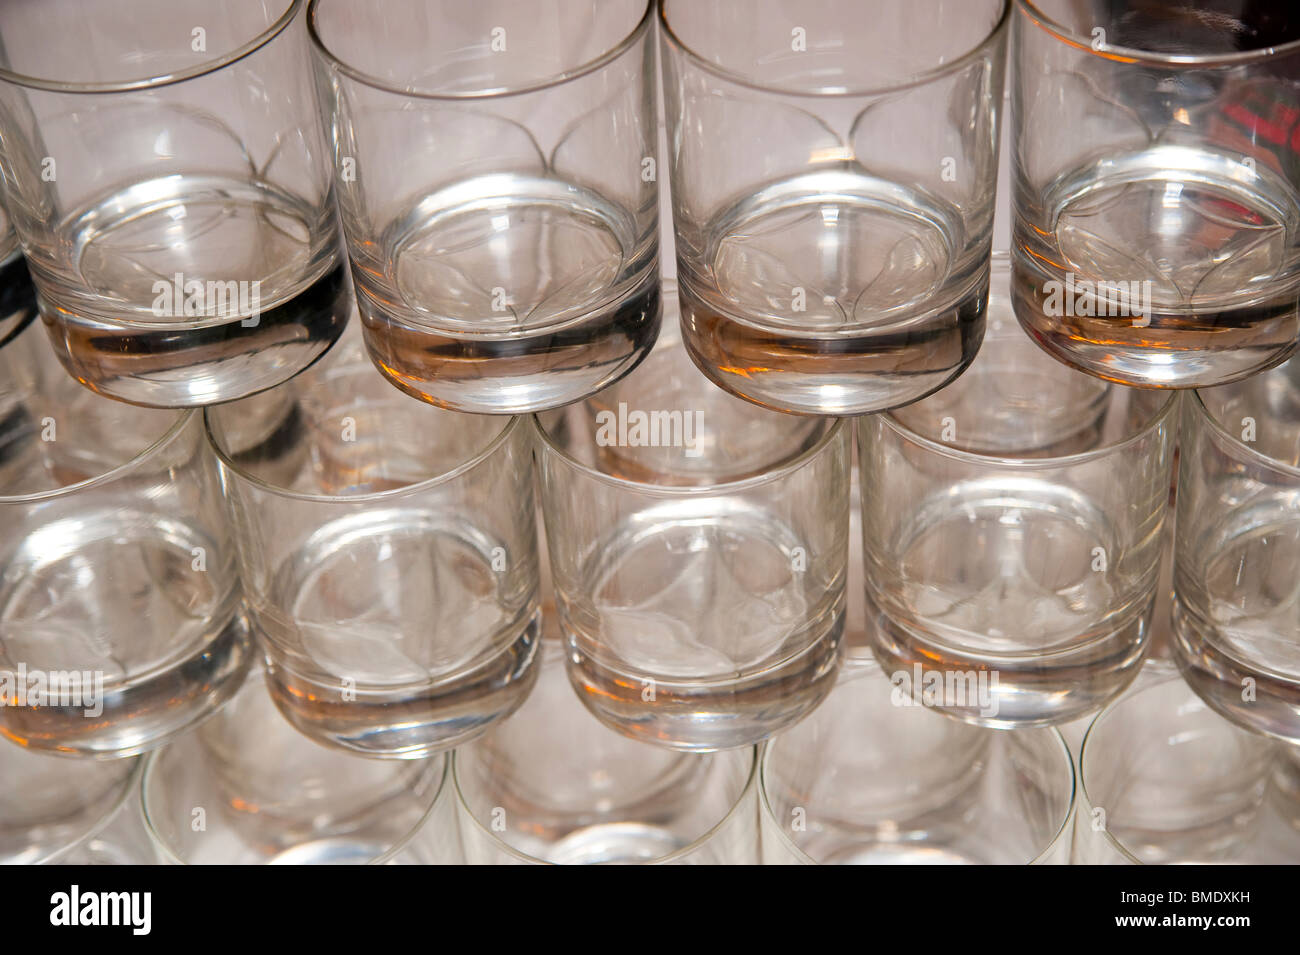 Empty water glasses lined up in rows Stock Photo